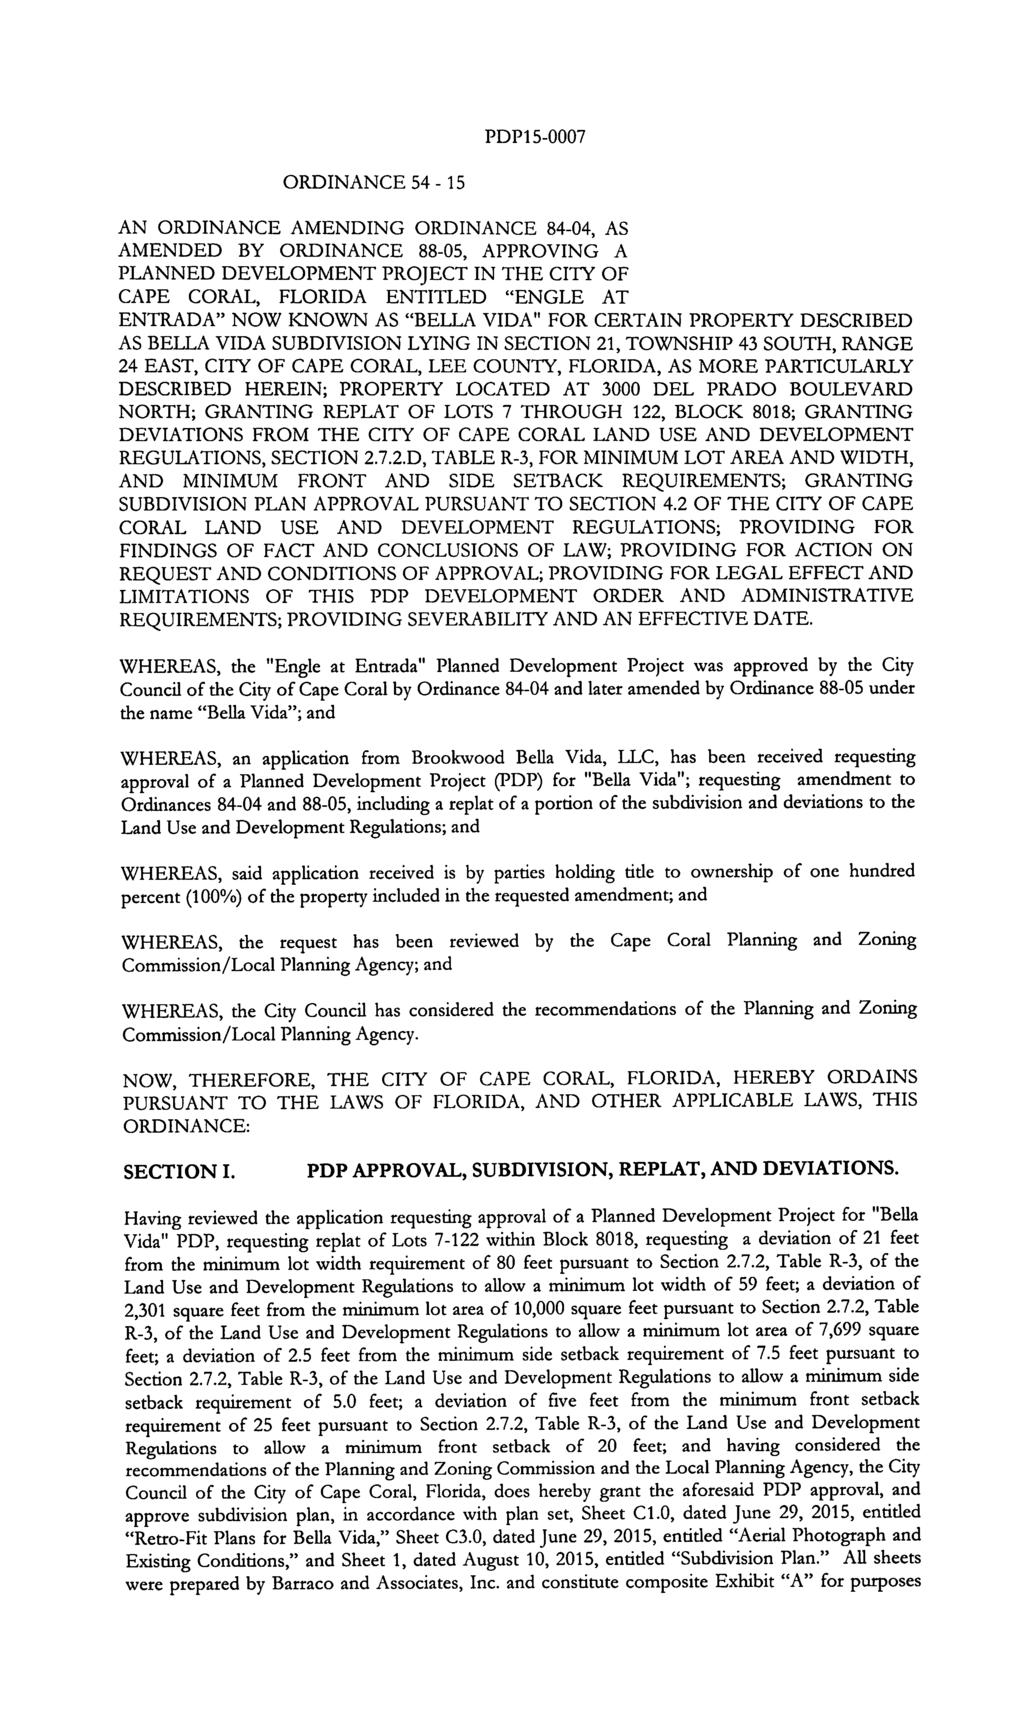 PDP15-0007 ORDINANCE 54-15 AN ORDINANCE AMENDING ORDINANCE 84-04, AS AMENDED BY ORDINANCE 88-05, APPROVING A PLANNED DEVELOPMENT PROJECT IN THE CITY OF CAPE CORAL, FLORIDA ENTITLED "ENGLE AT ENTRADA"